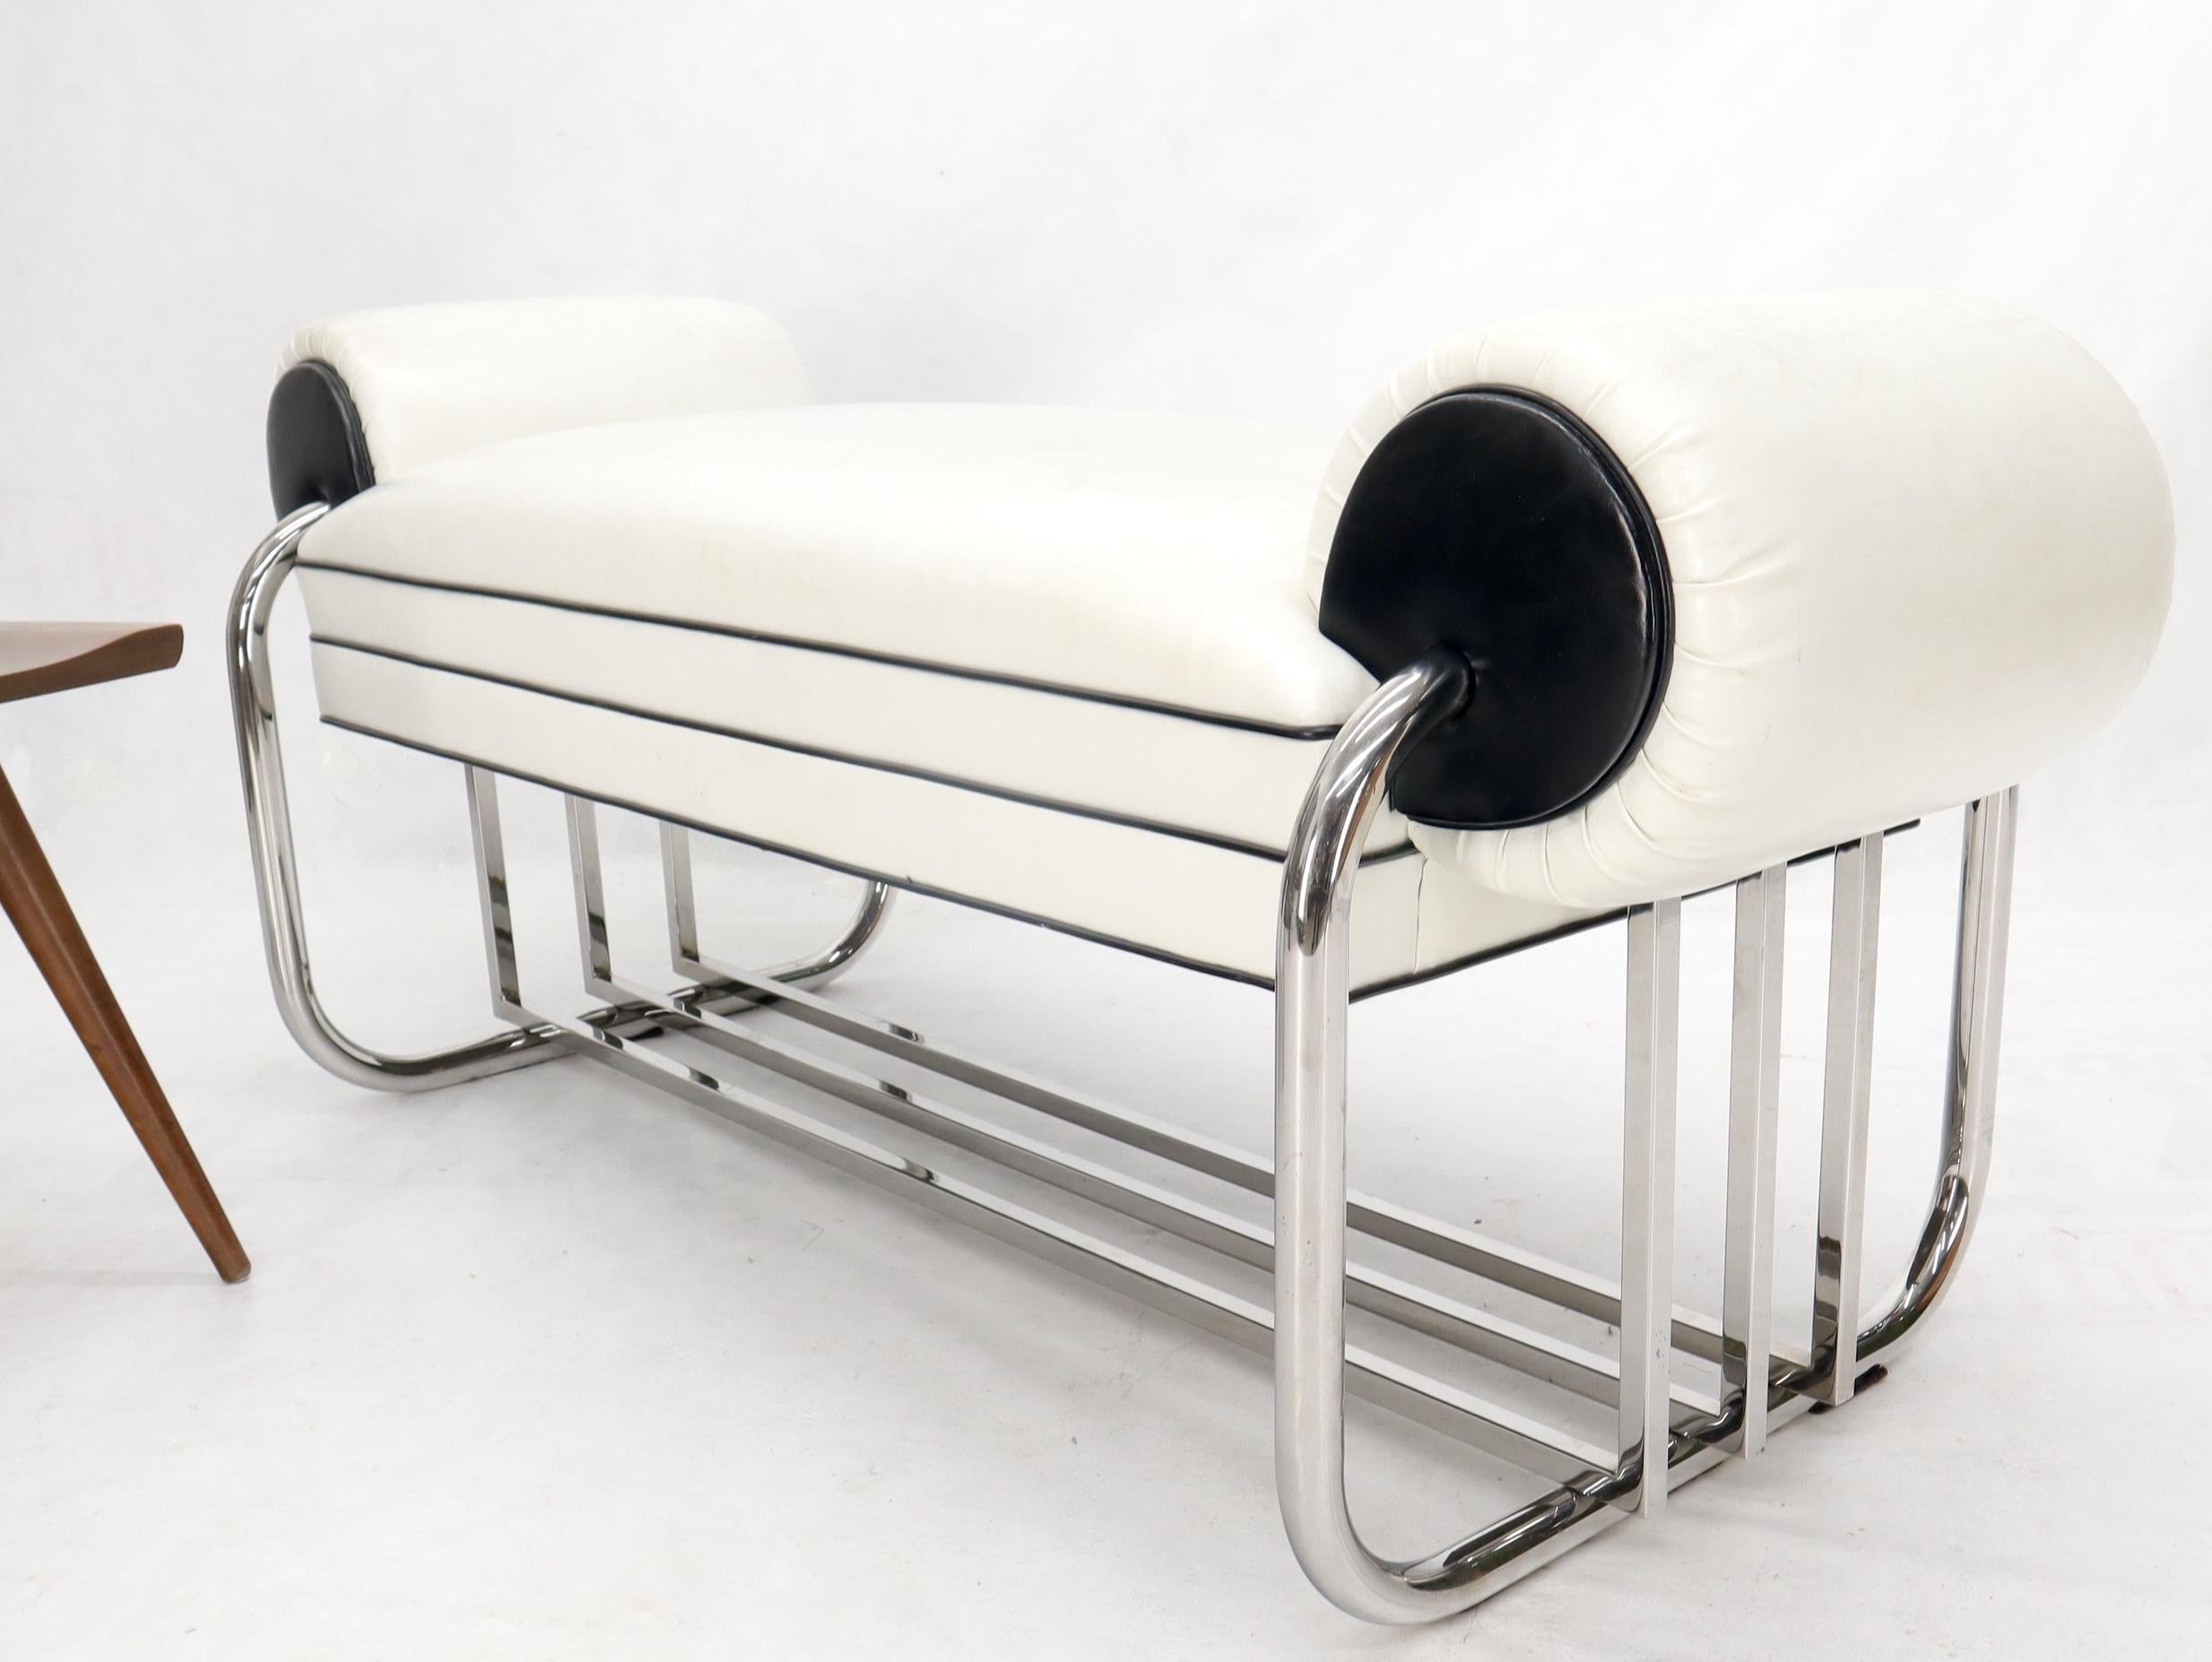 Bauhaus Chrome Bent Tube Black and White Upholstery Bench In Good Condition For Sale In Rockaway, NJ